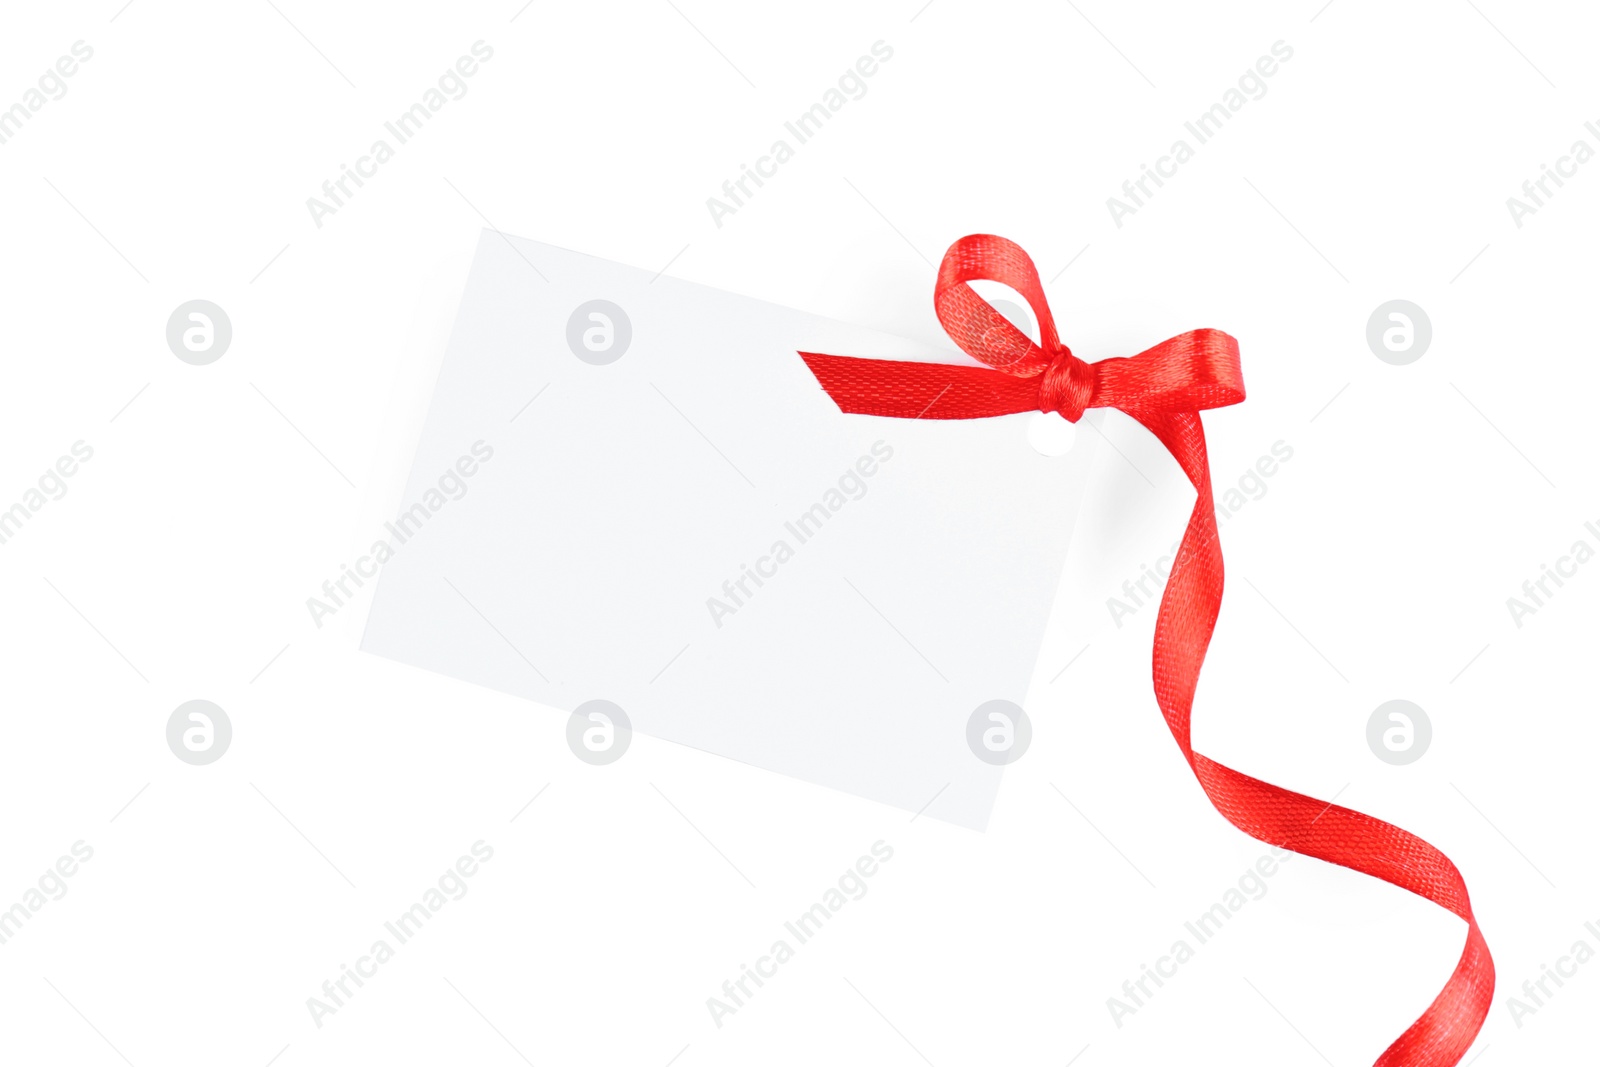 Photo of Blank gift tag with red satin ribbon on white background, top view